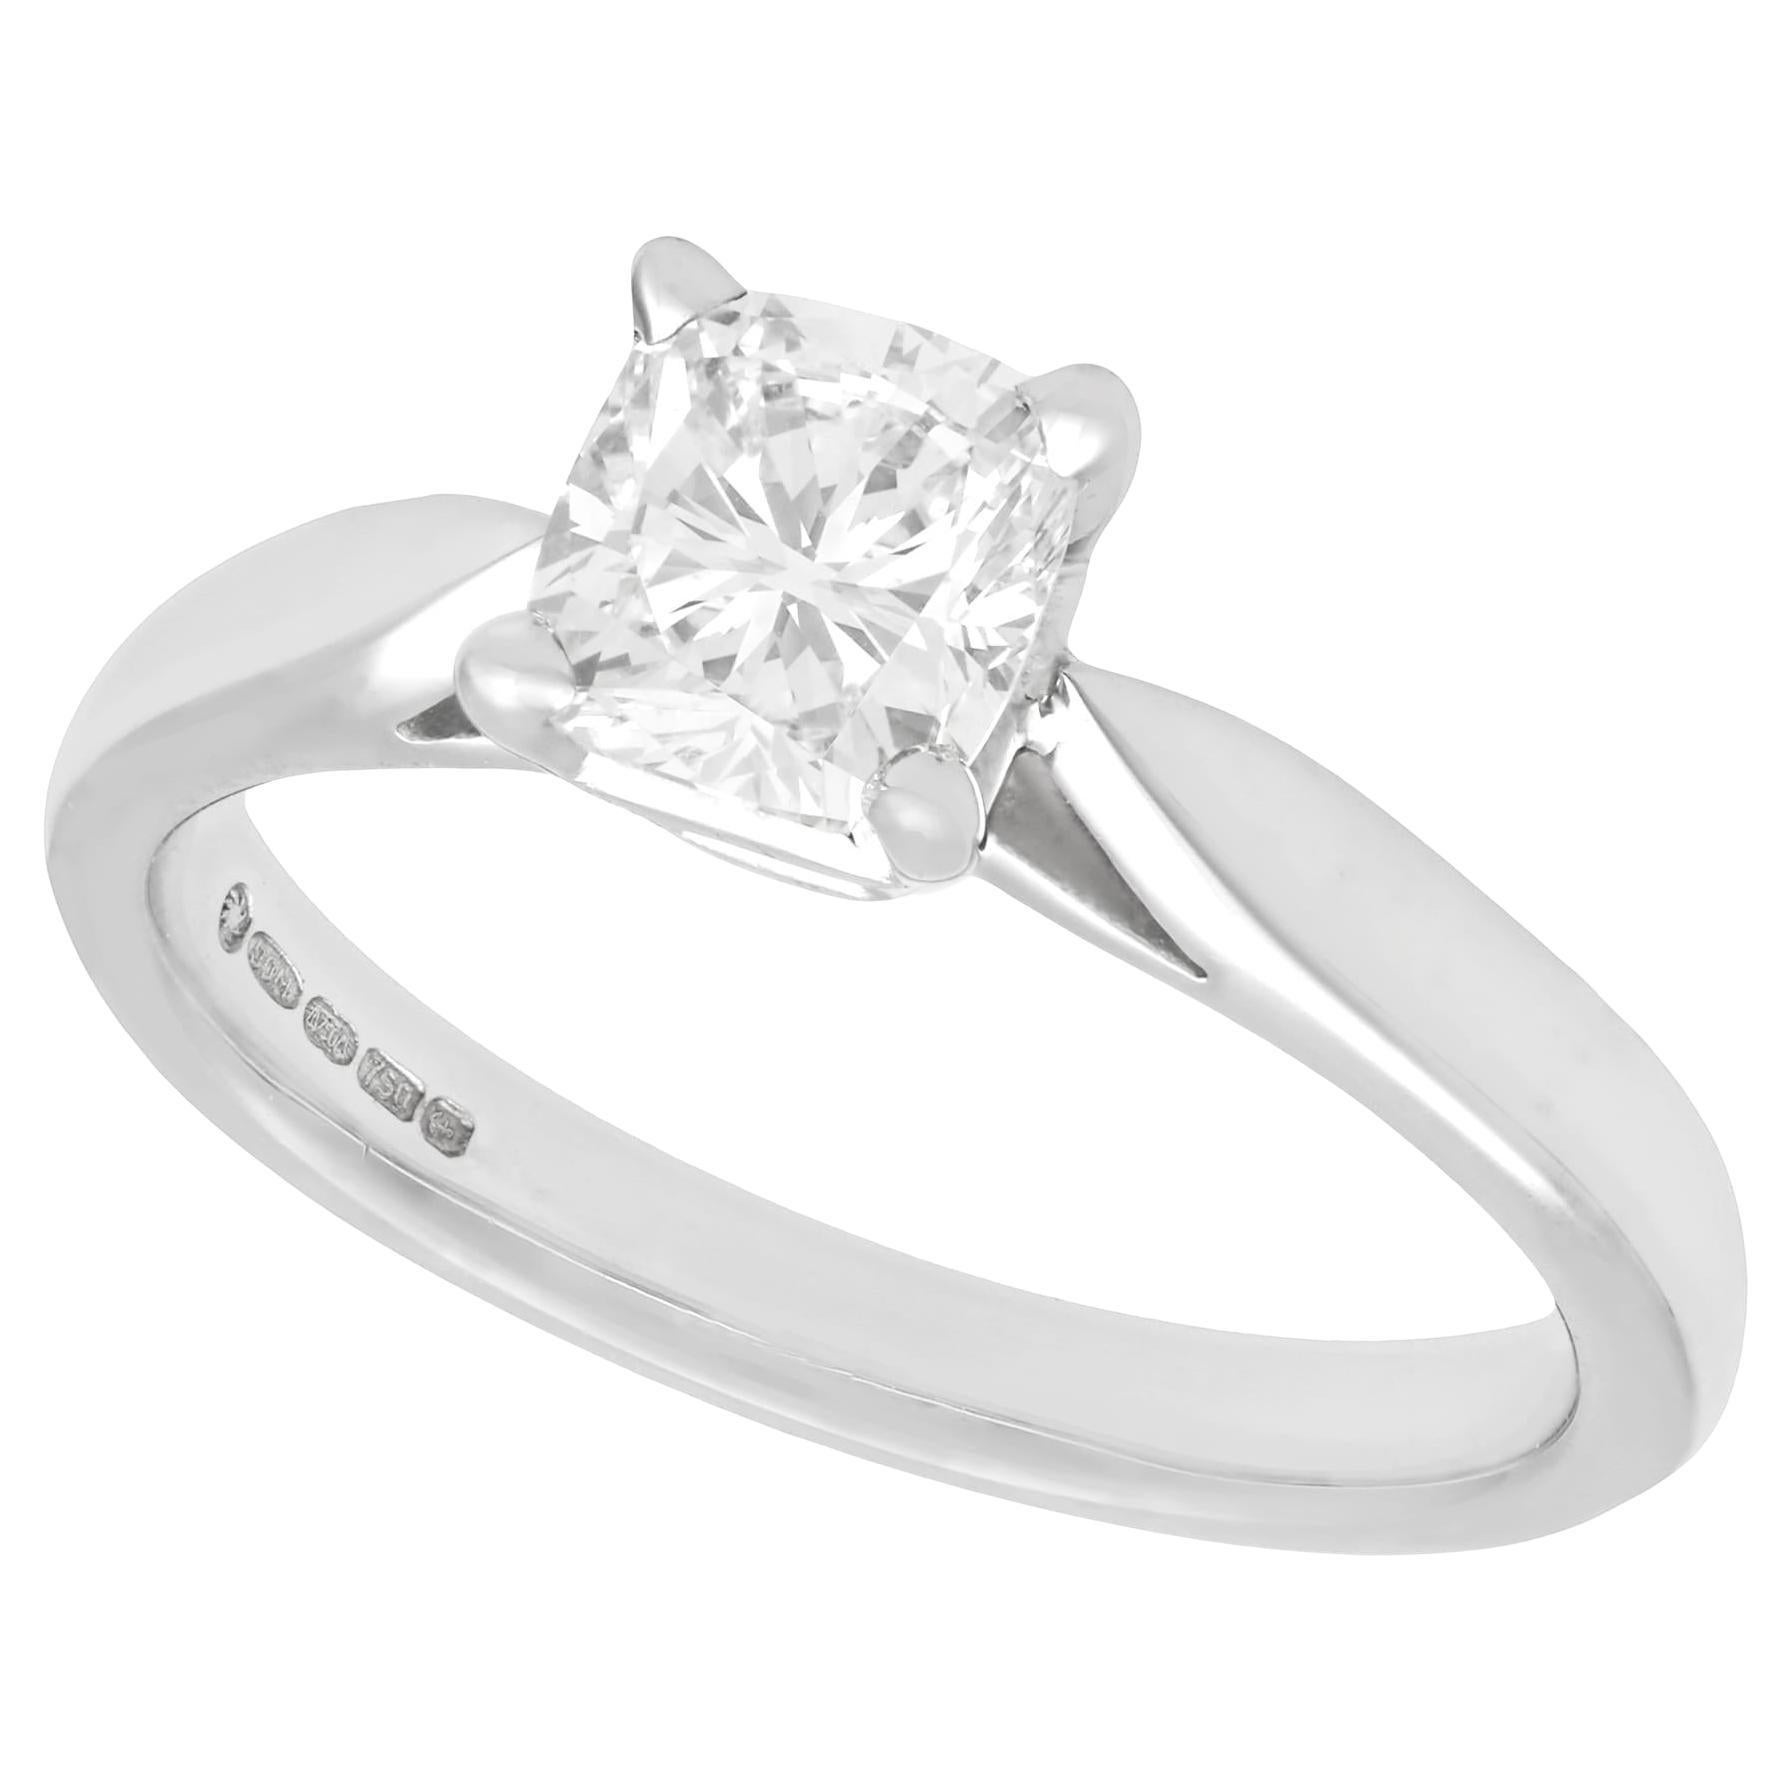 1.05 Carat Diamond and White Gold Solitaire Engagement Ring